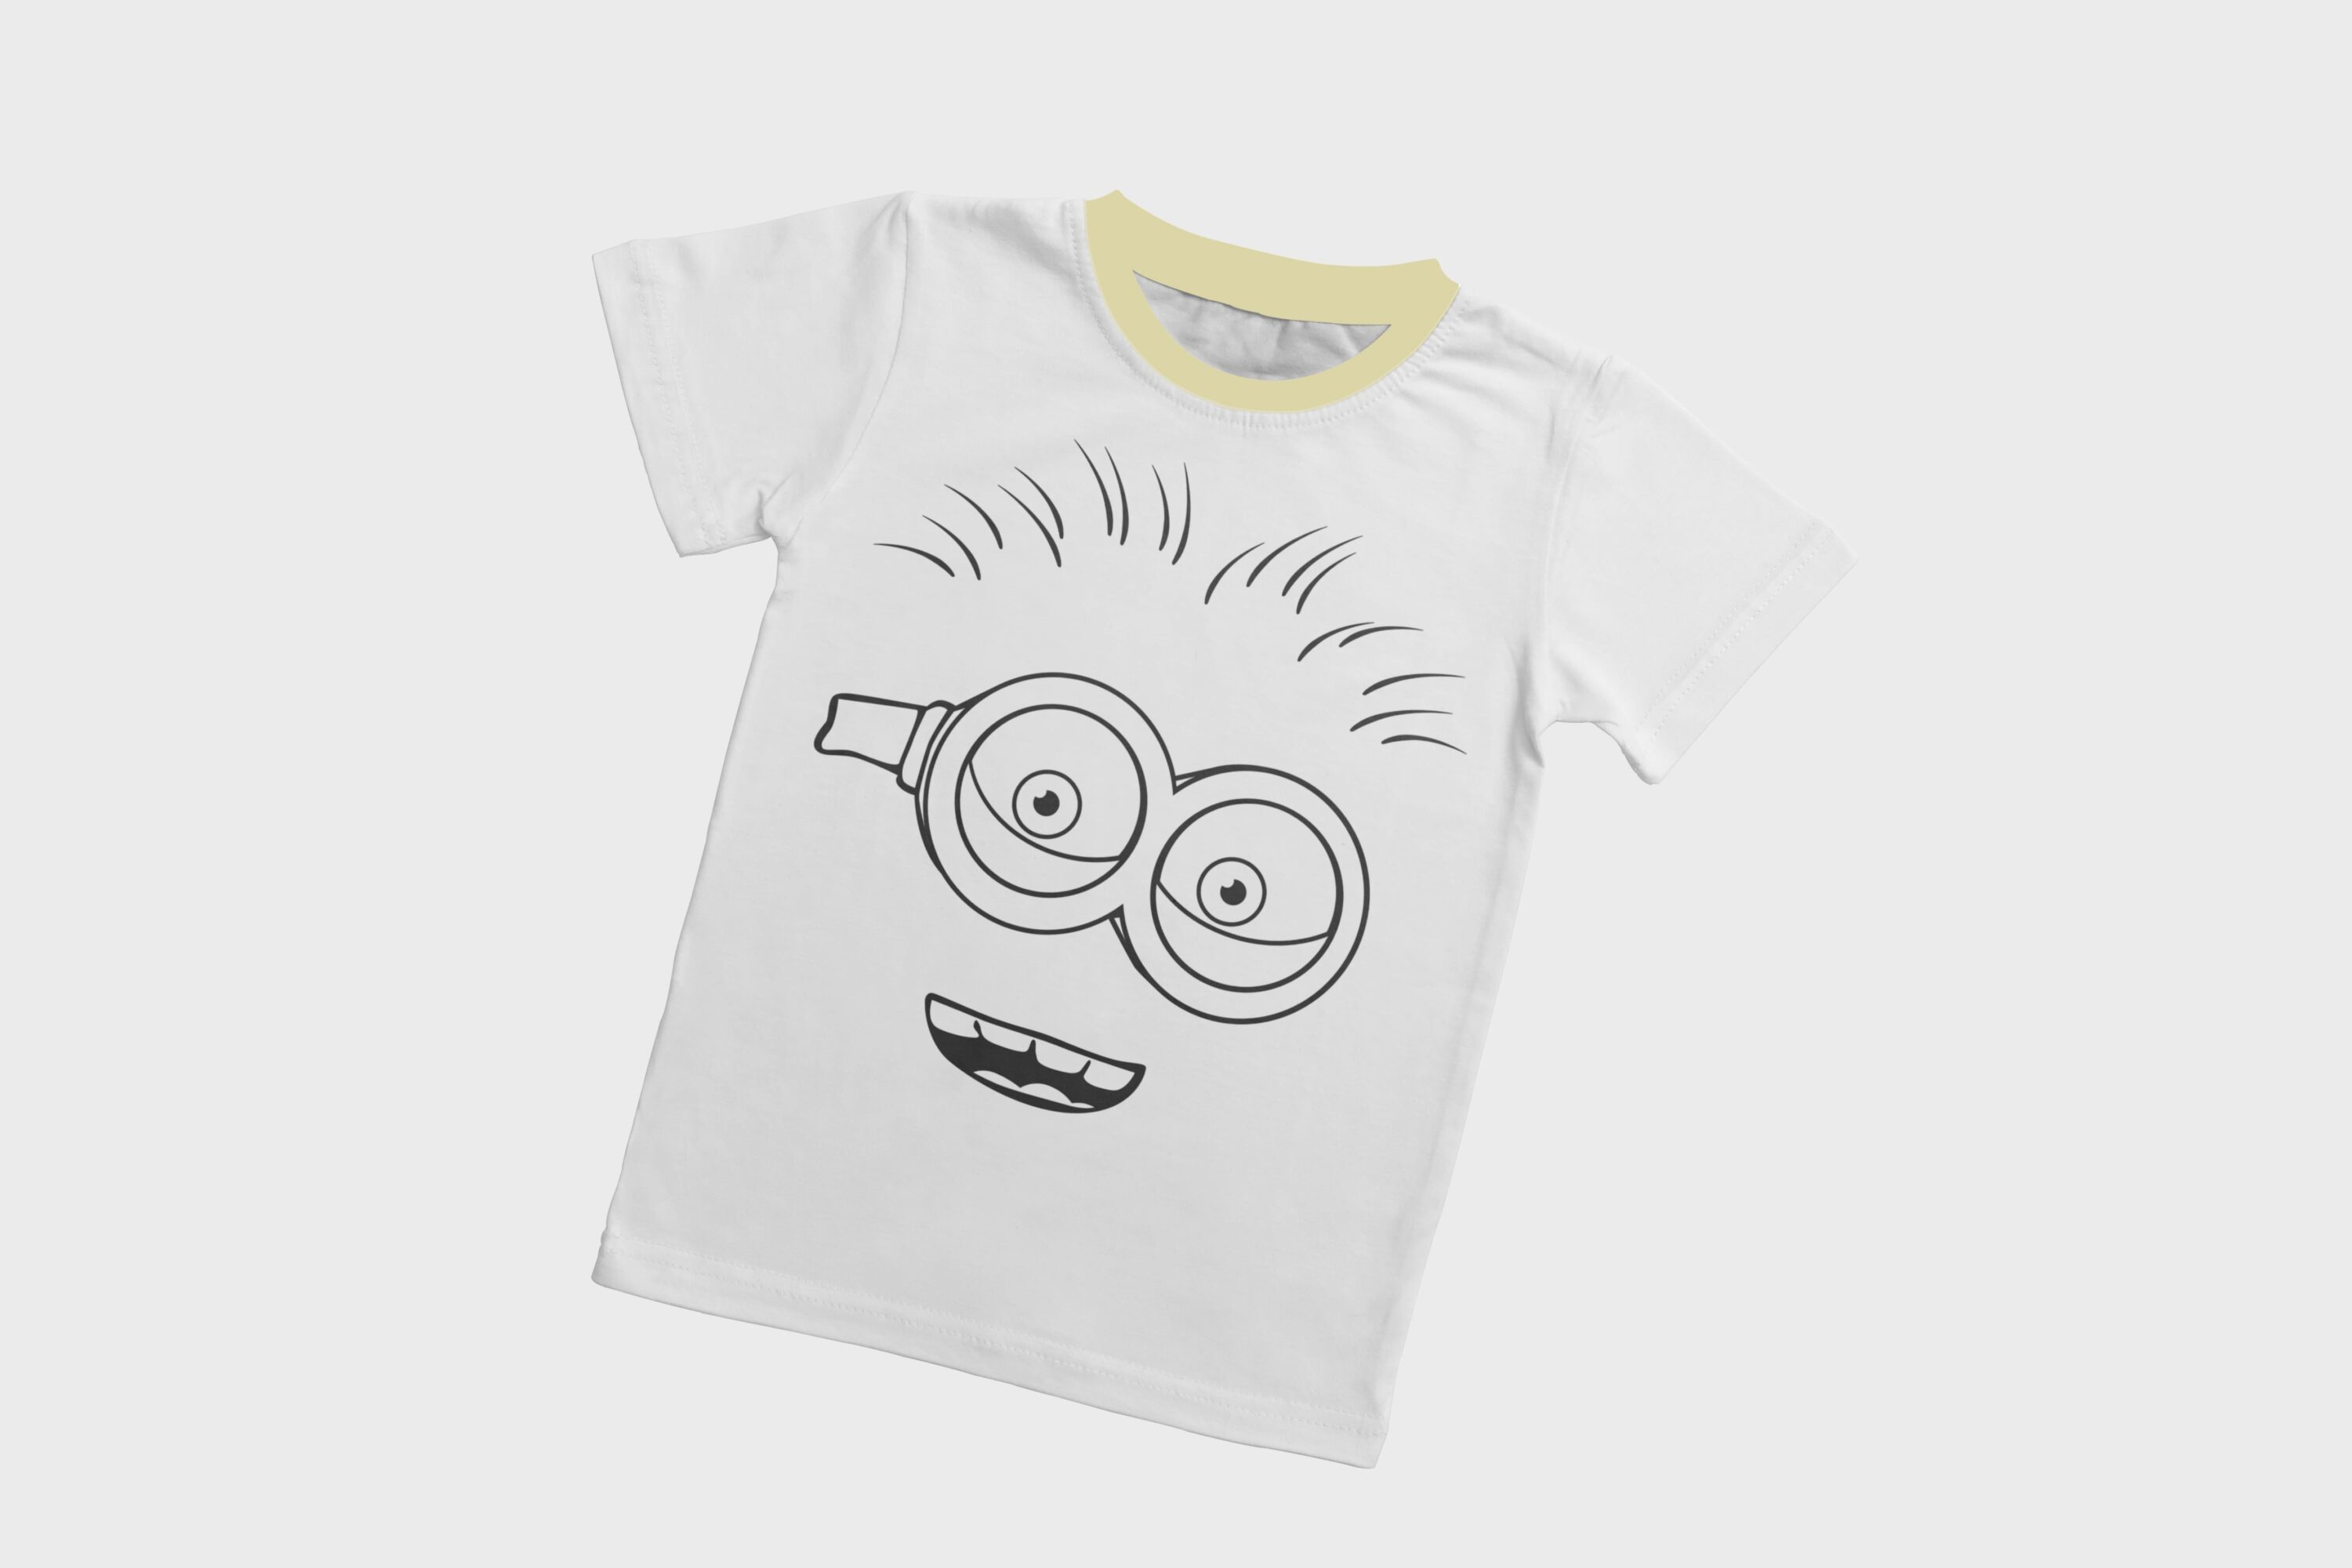 A white T-shirt with a dirty yellow collar and a silhouette face of a laughing minion.